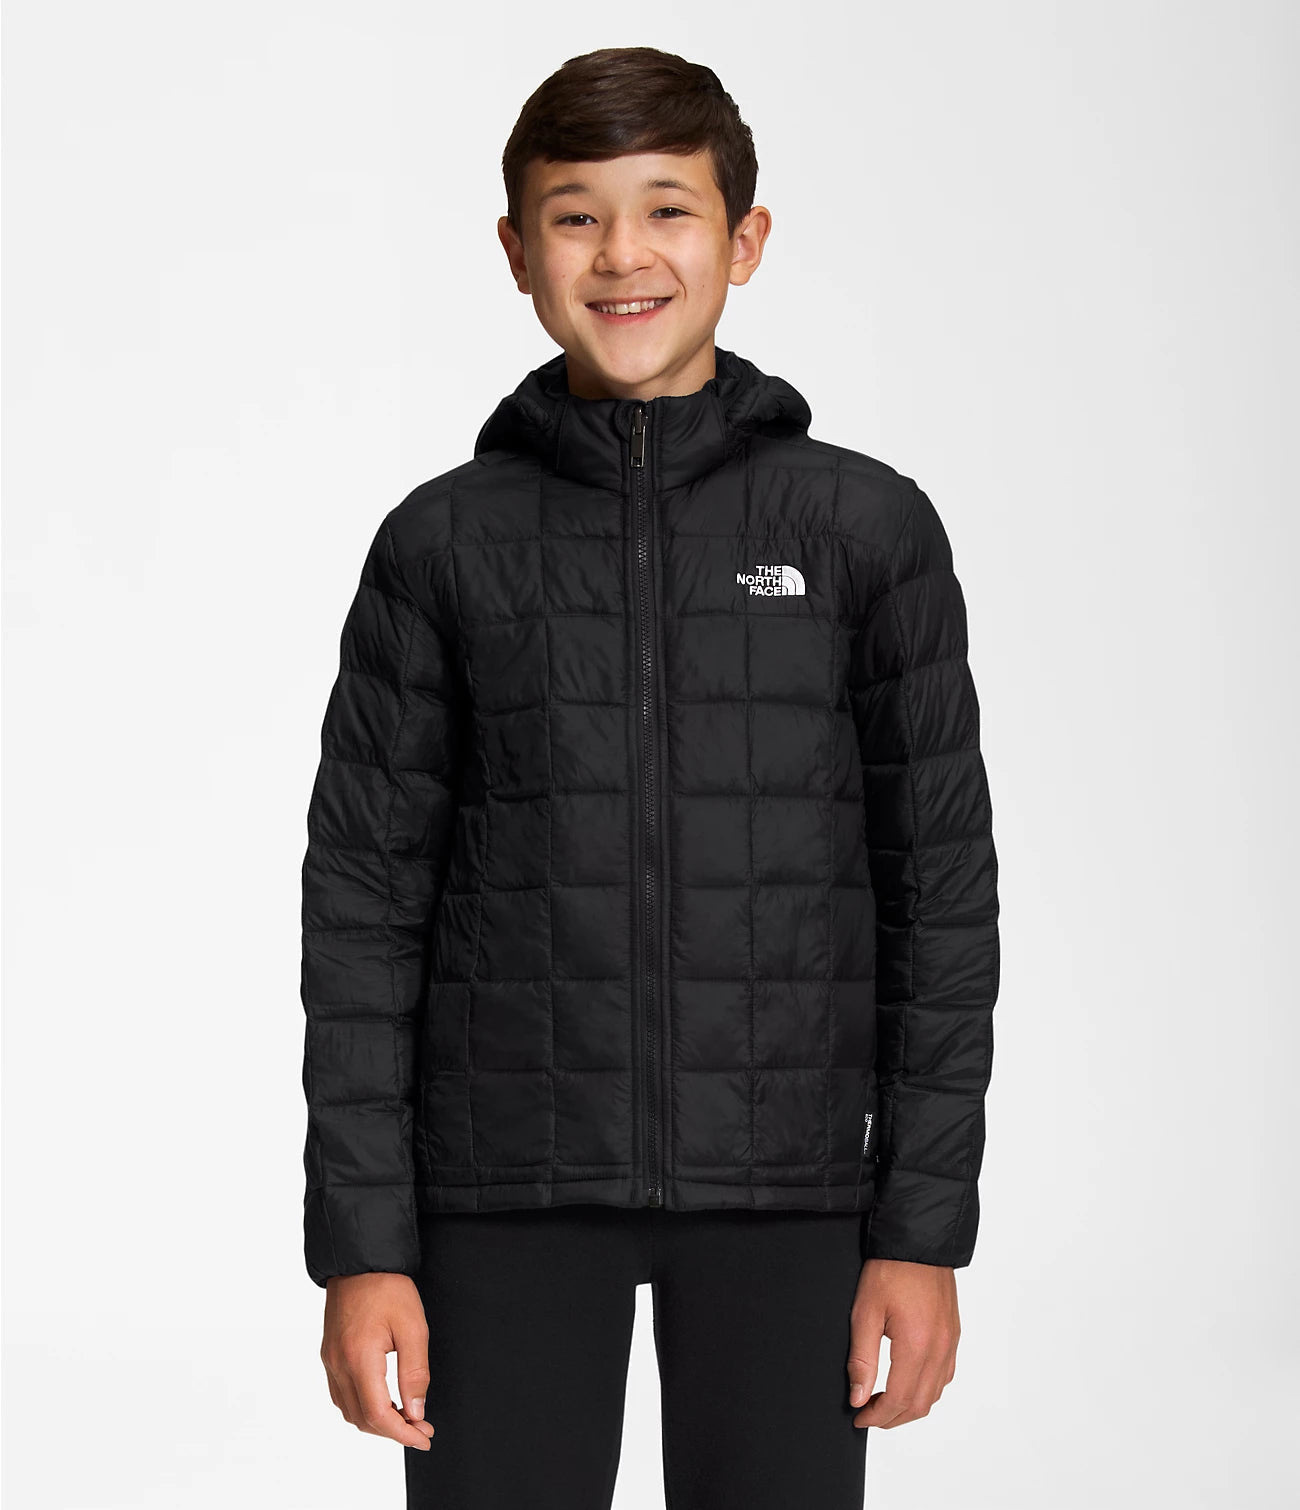 The North Face Kids Youth: Outdoor Gear and Apparel